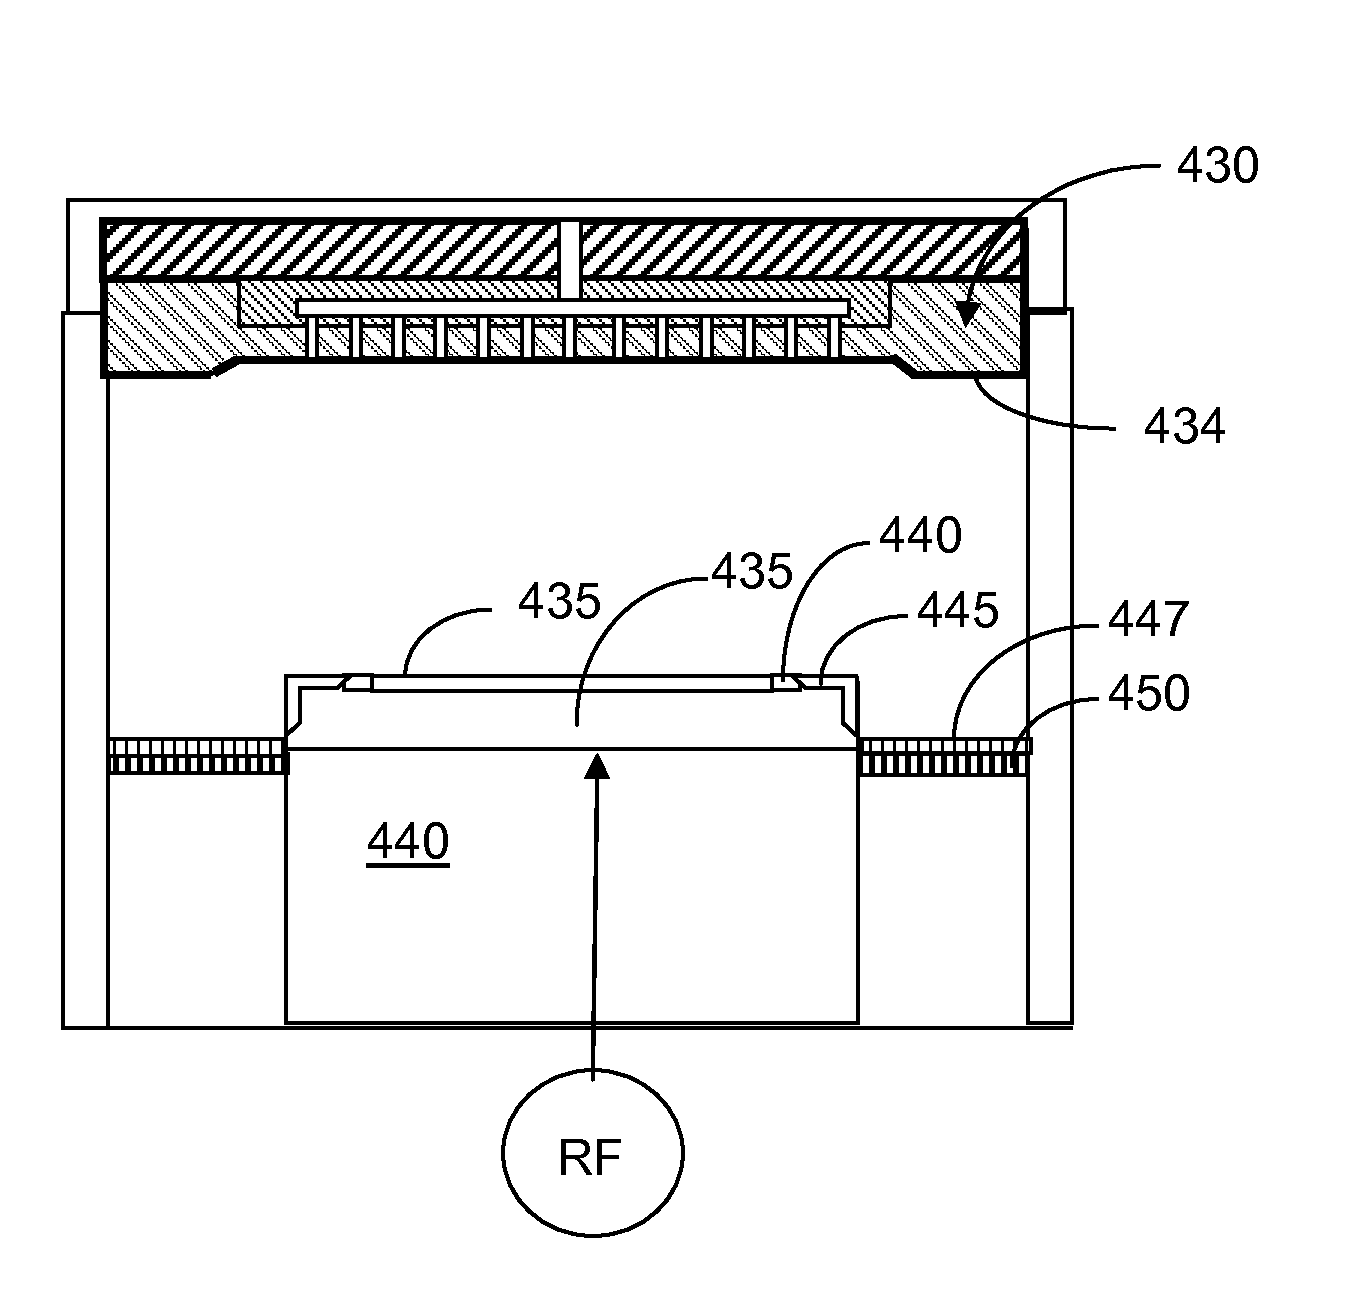 Coating for performance enhancement of semiconductor apparatus